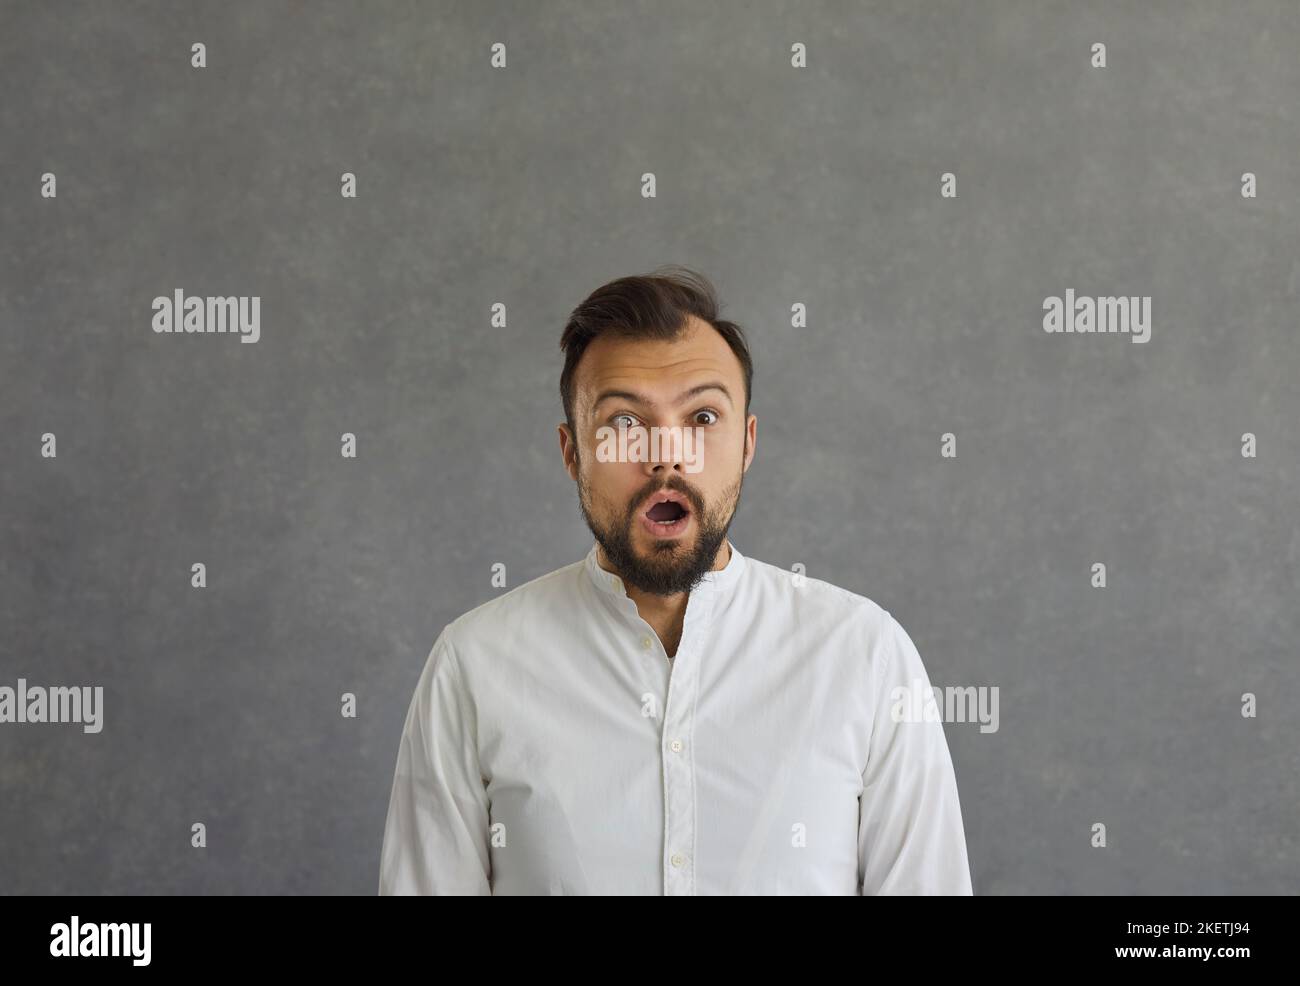 Caucasian man with a surprised and shocked expression is stunned by unexpected news or information. Stock Photo